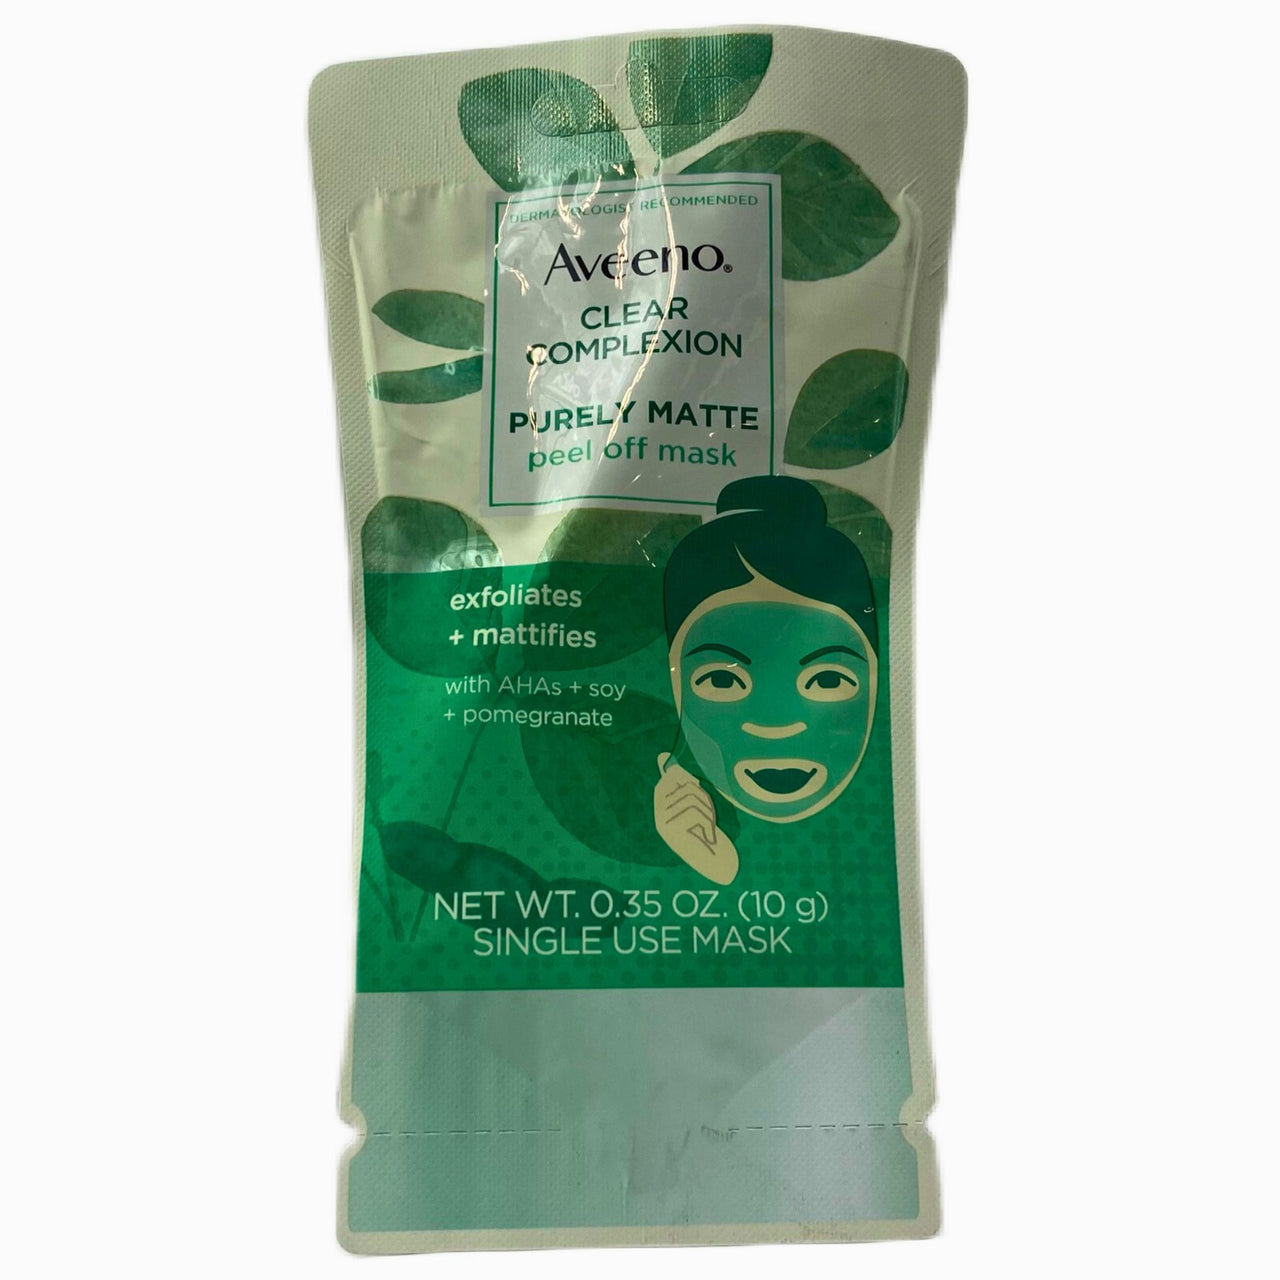 Aveeno Clear Complexion Purely Matte Peel Off Mask 